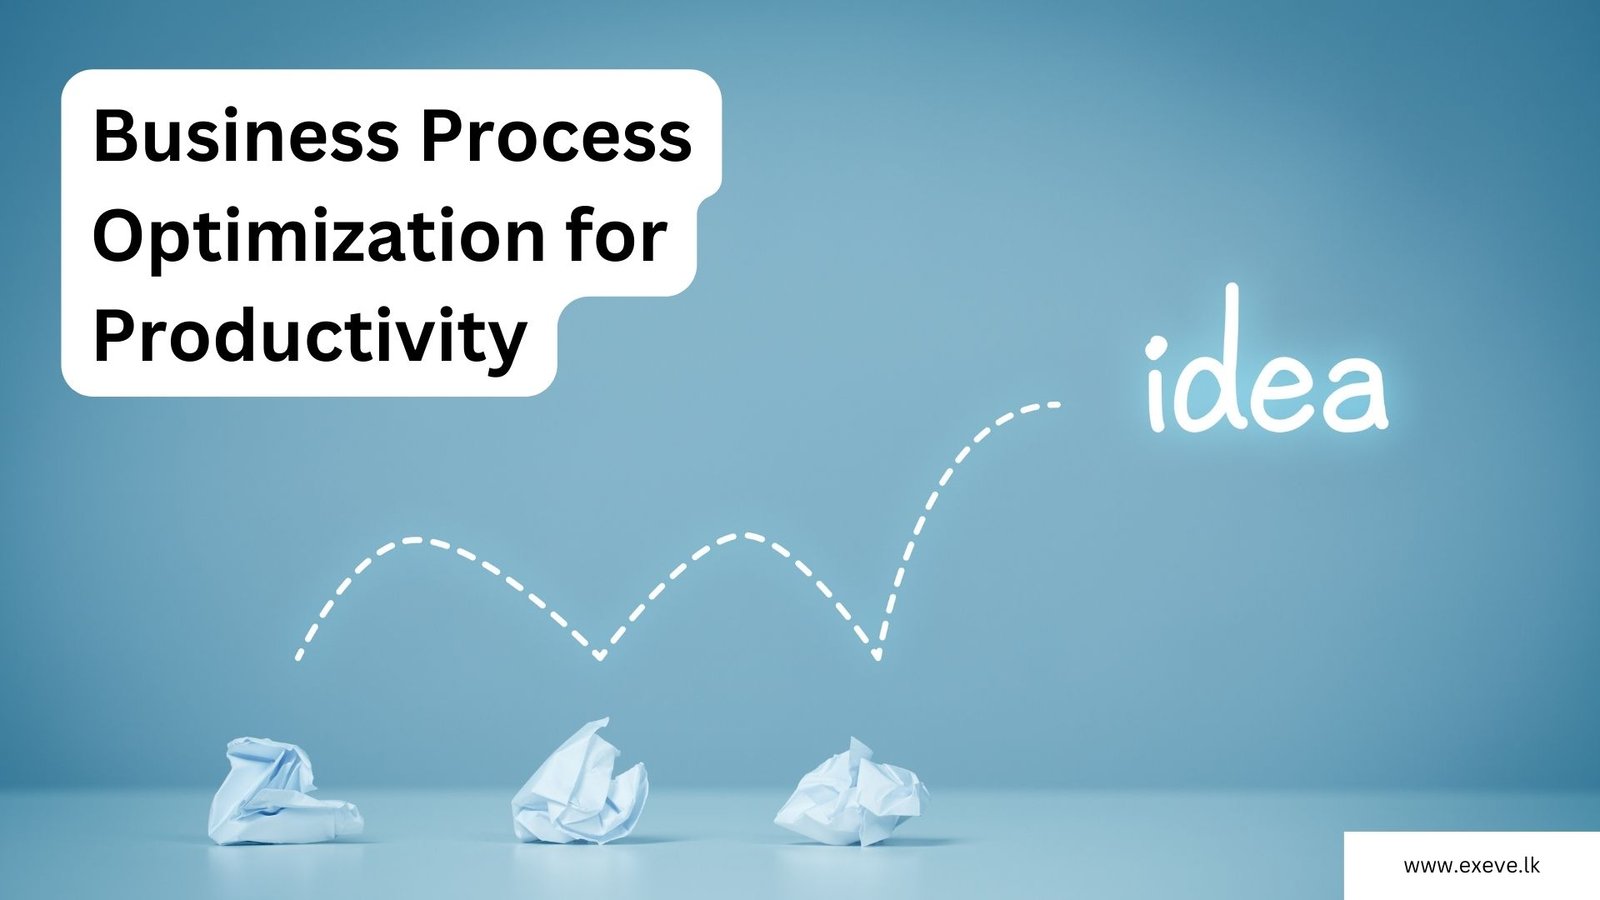 Business Process Optimization for Productivity